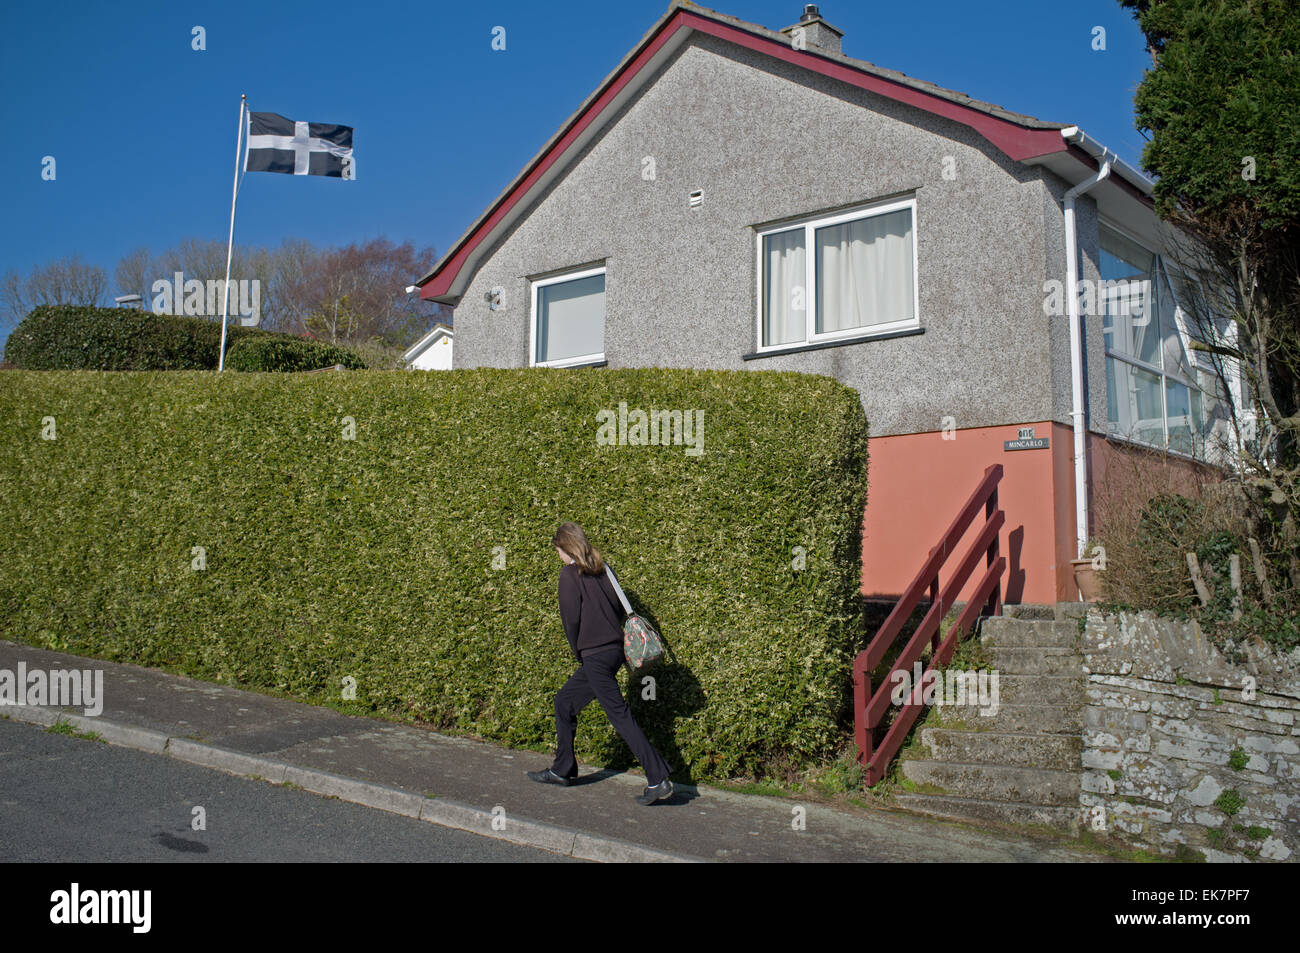 A child walks past a house with a cornish flag in the garden Stock Photo